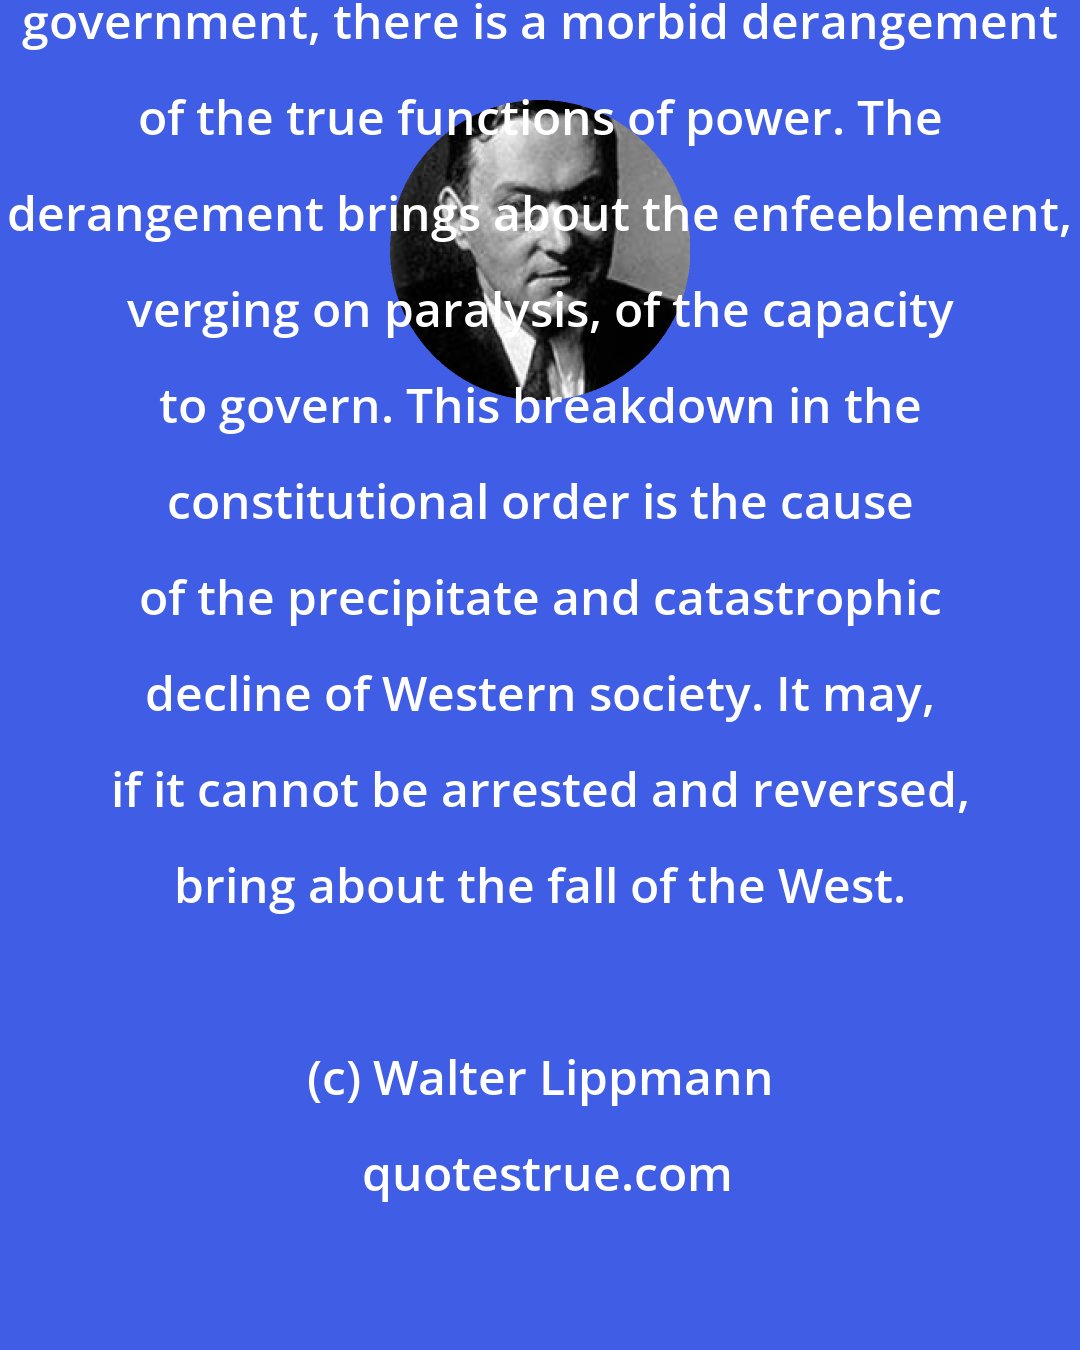 Walter Lippmann: Where mass opinion dominates the government, there is a morbid derangement of the true functions of power. The derangement brings about the enfeeblement, verging on paralysis, of the capacity to govern. This breakdown in the constitutional order is the cause of the precipitate and catastrophic decline of Western society. It may, if it cannot be arrested and reversed, bring about the fall of the West.